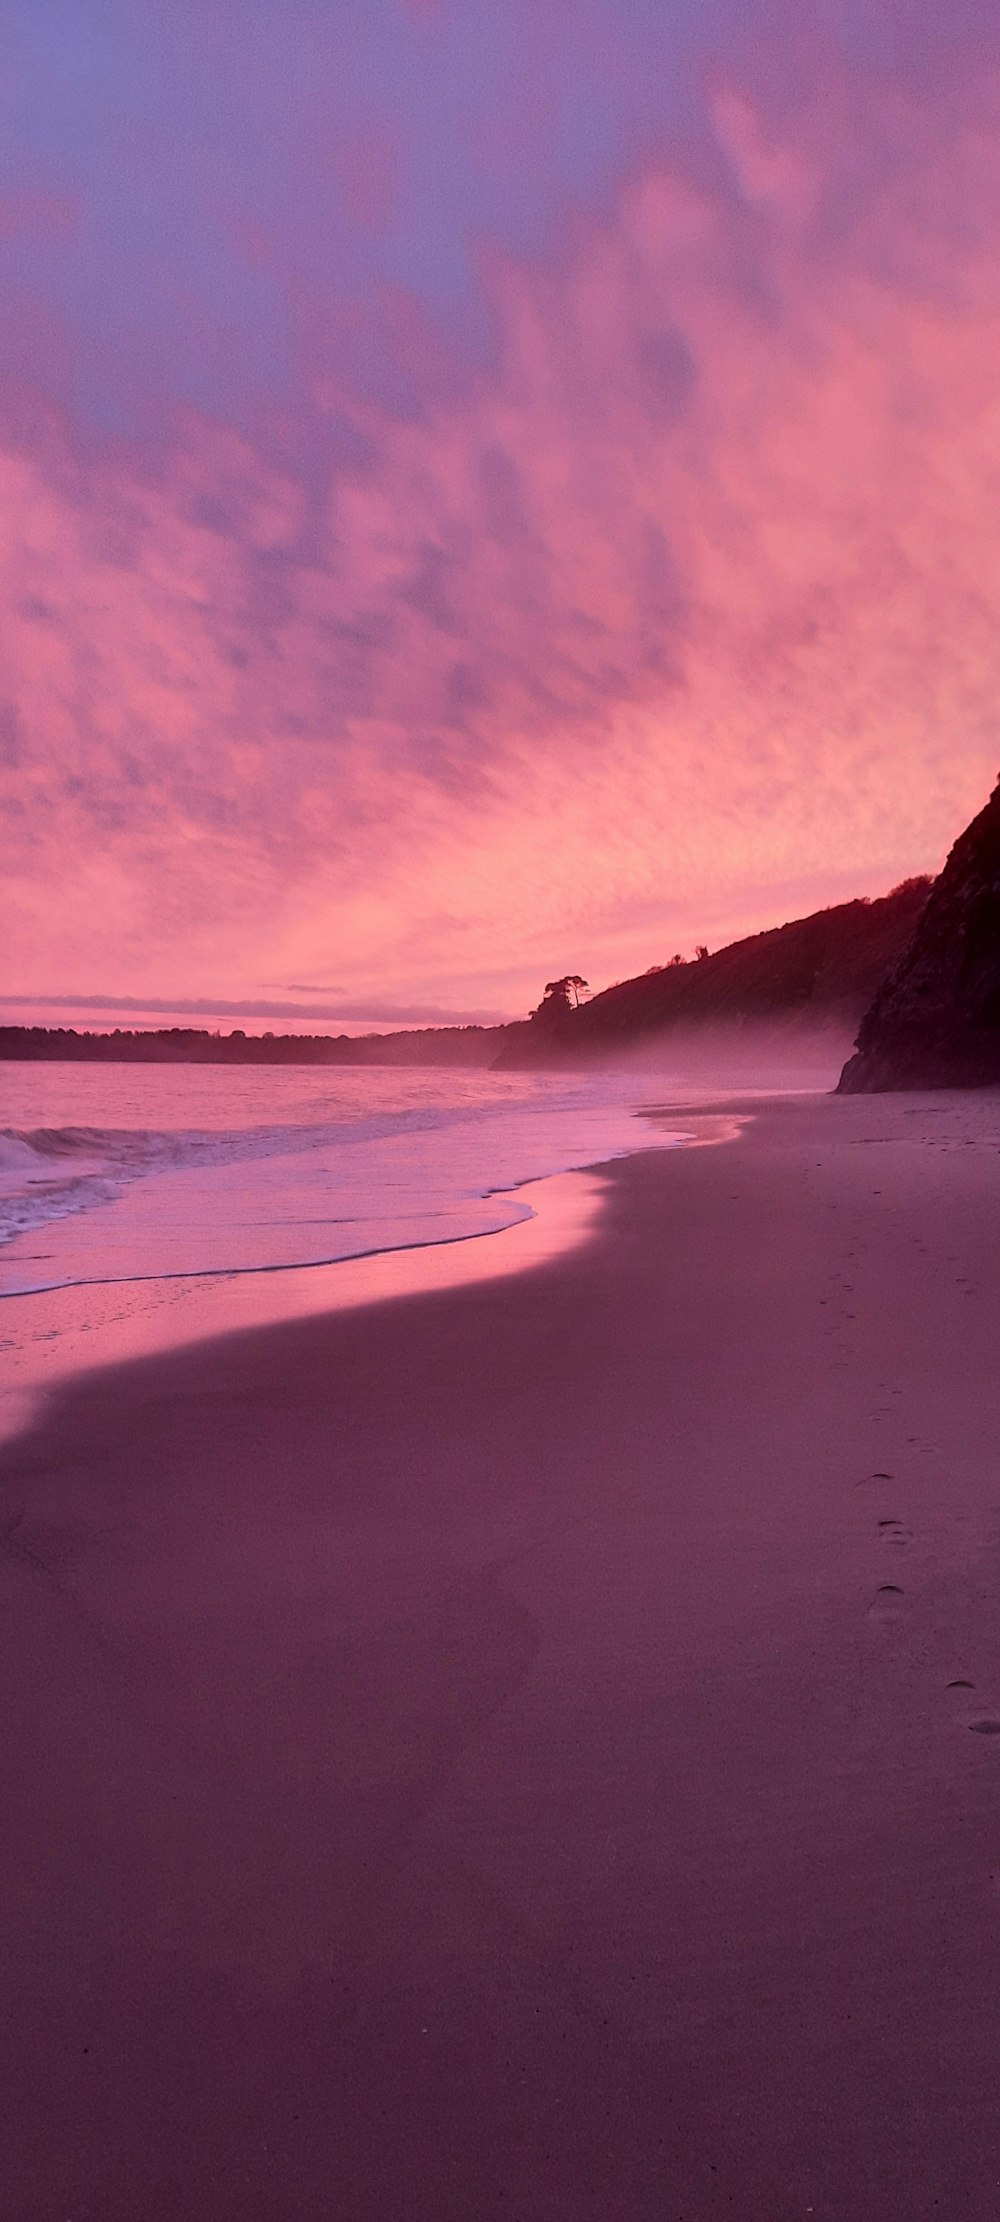 a pink sky over a beach with footprints in the sand